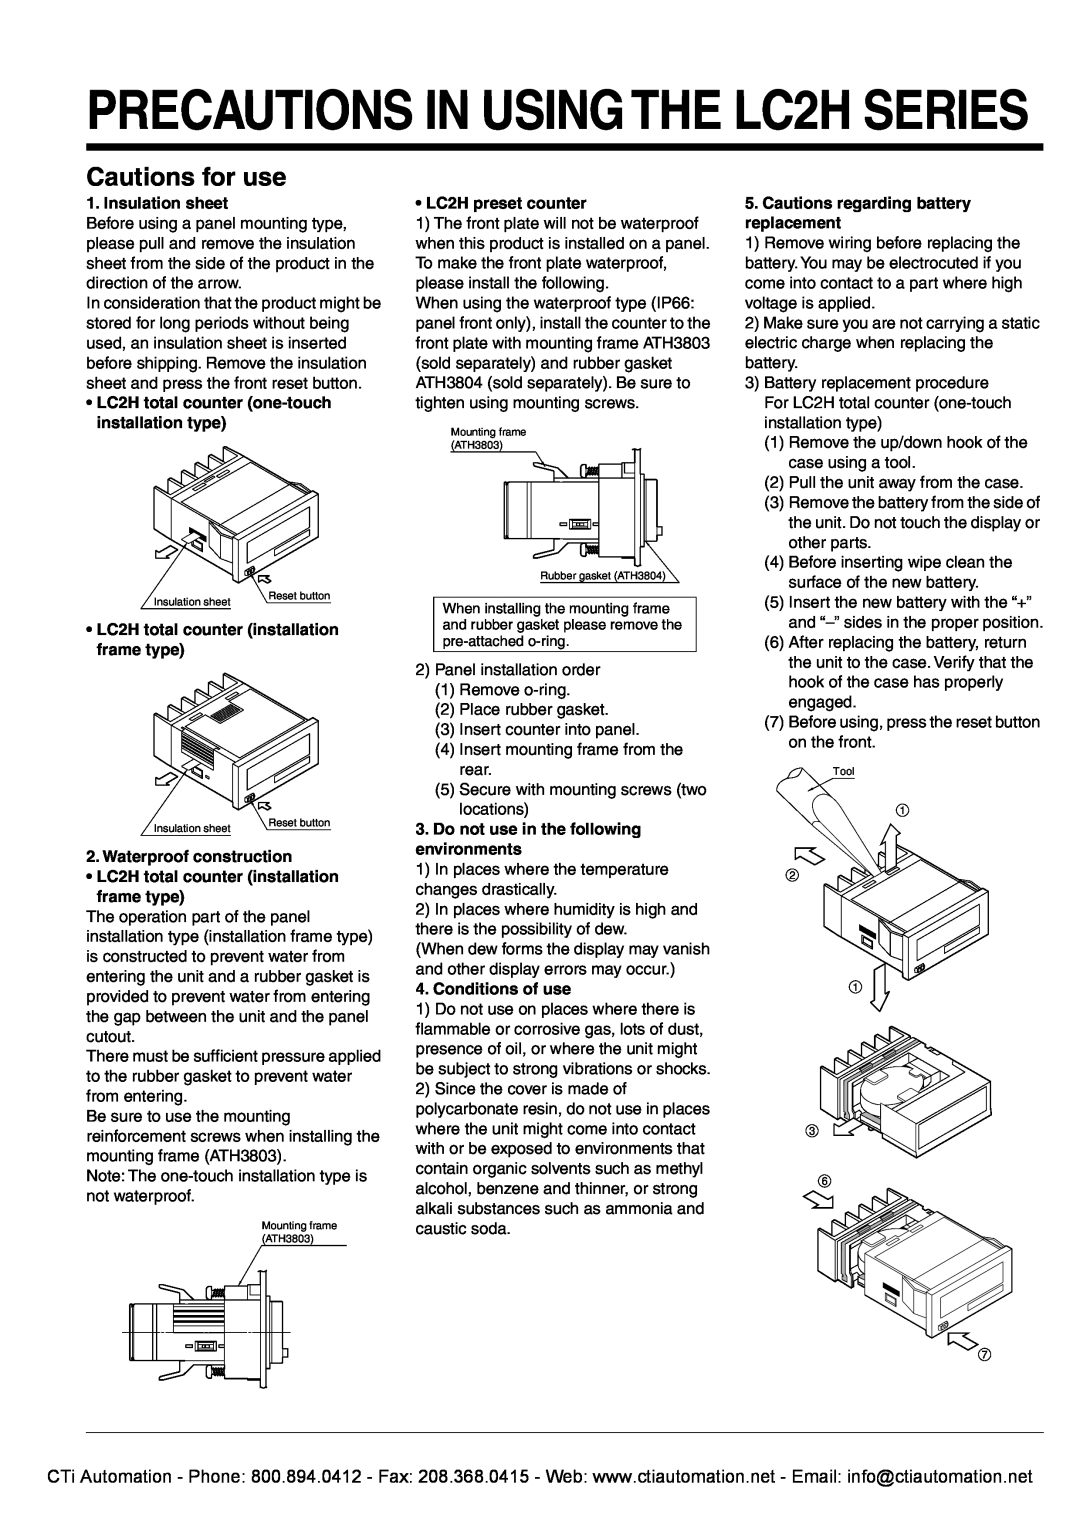 Panasonic specifications PRECAUTIONS IN USING THE LC2H SERIES, Cautions for use, Insulation sheet, LC2H preset counter 